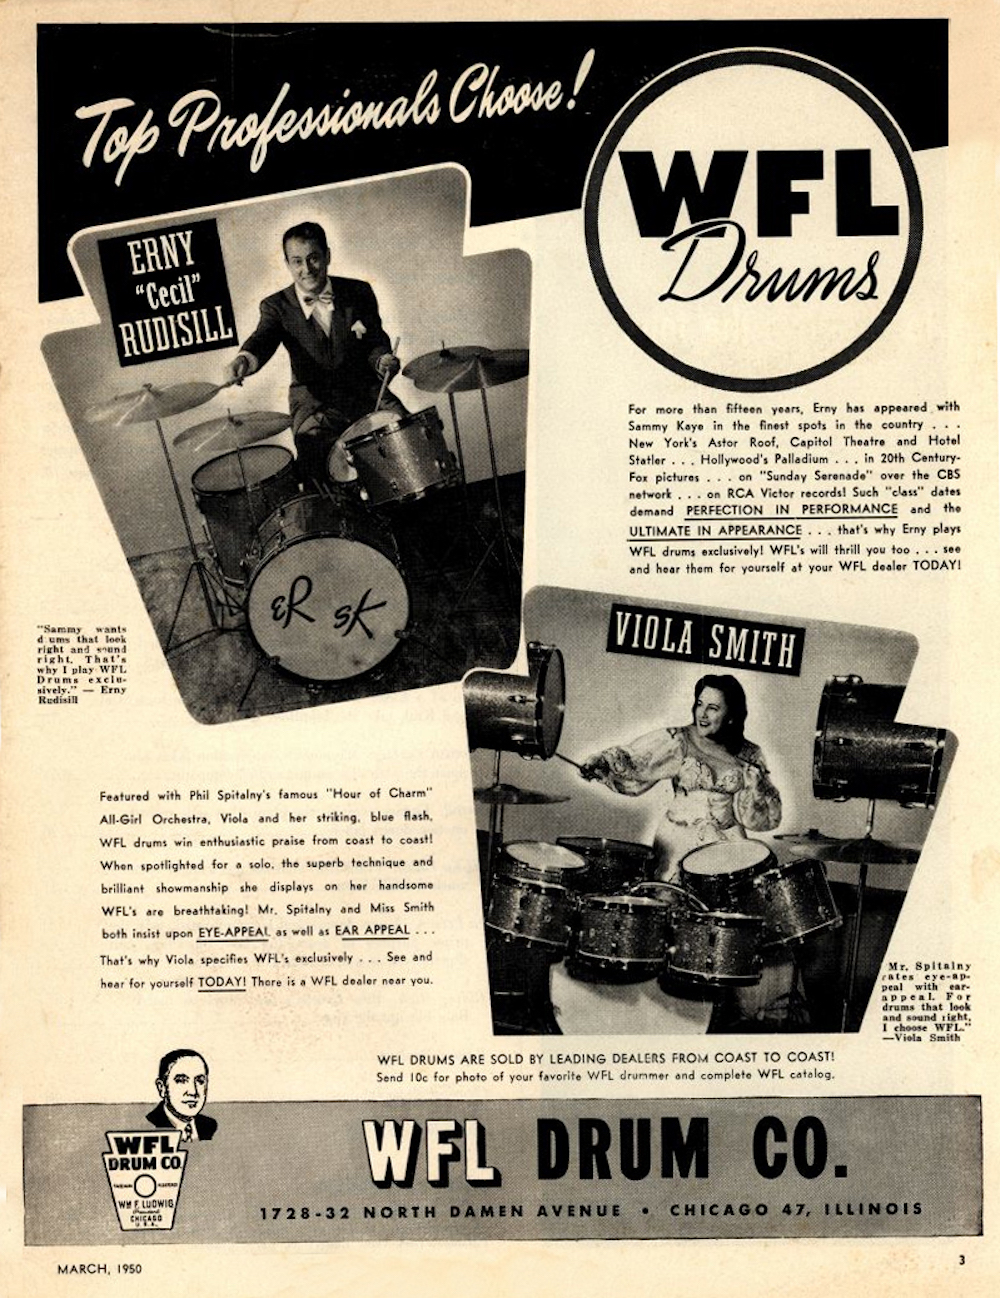 Viola Smith as an endorser for WFL Drums.